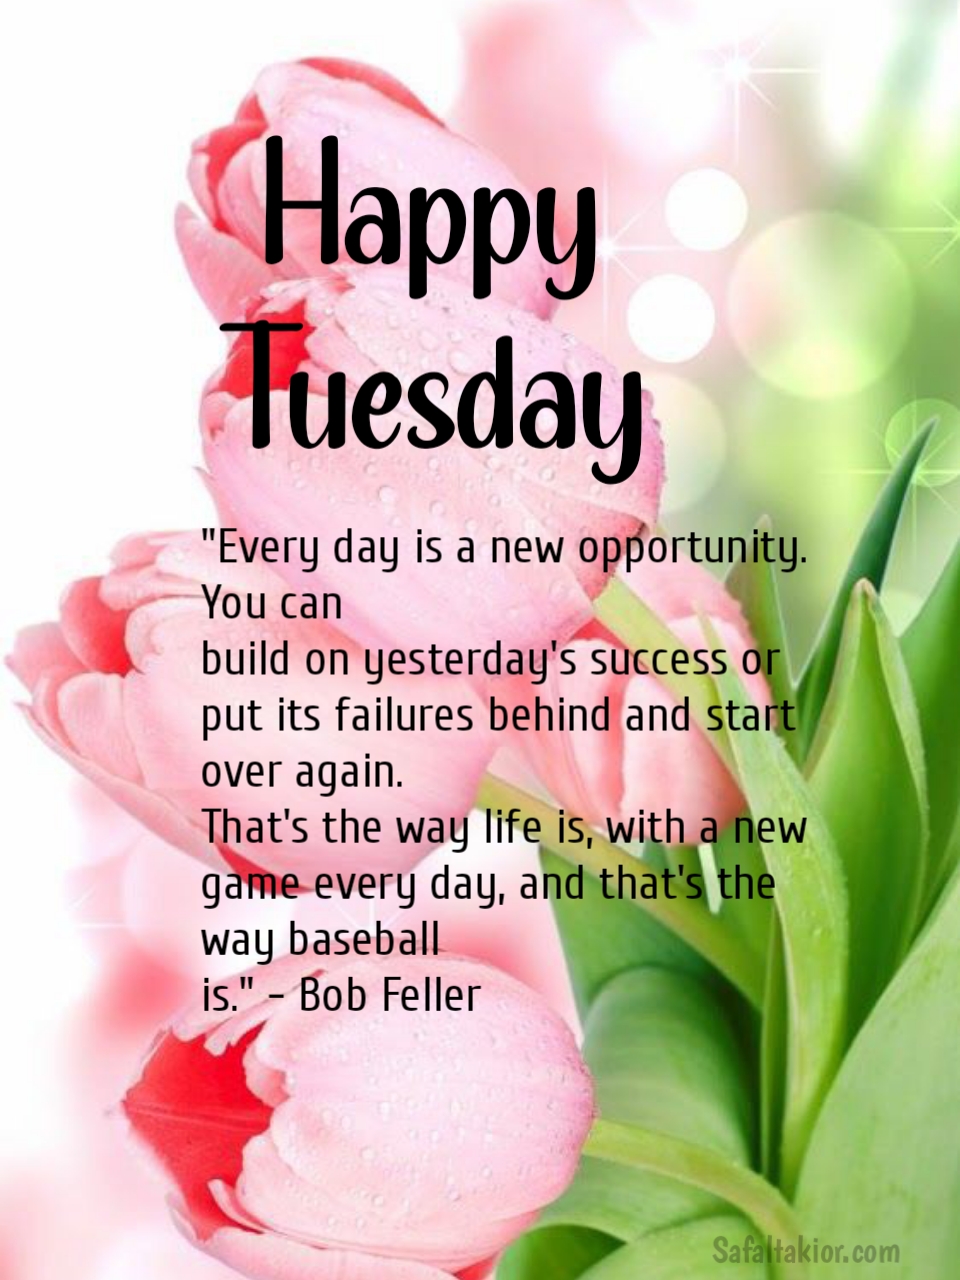 Happy Tuesday Quotes images